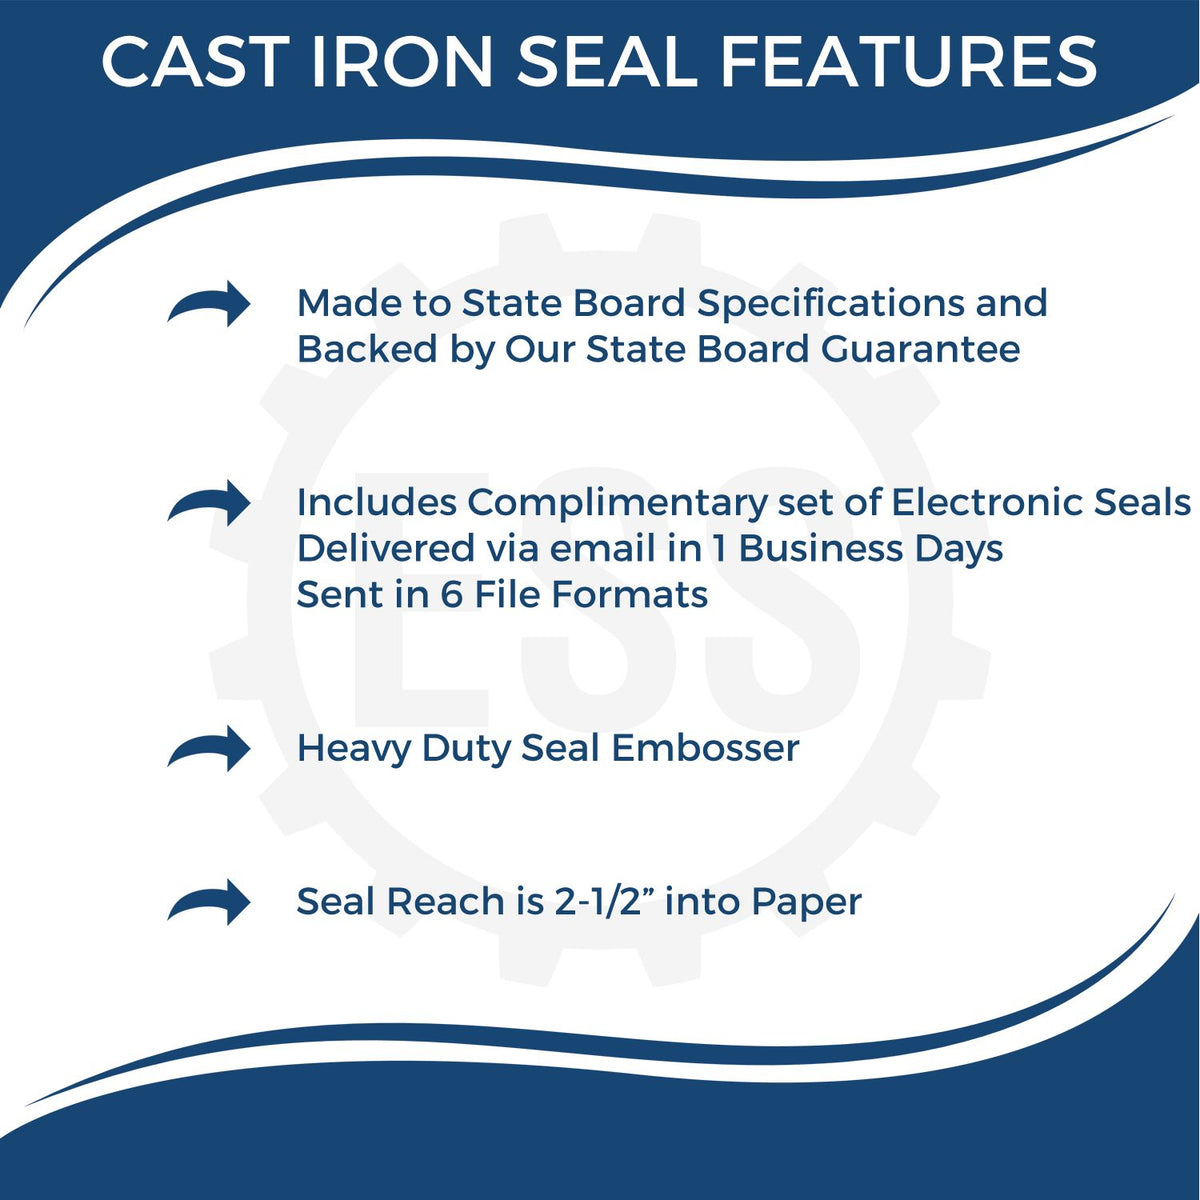 A picture of an infographic highlighting the selling points for the Heavy Duty Cast Iron Hawaii Geologist Seal Embosser